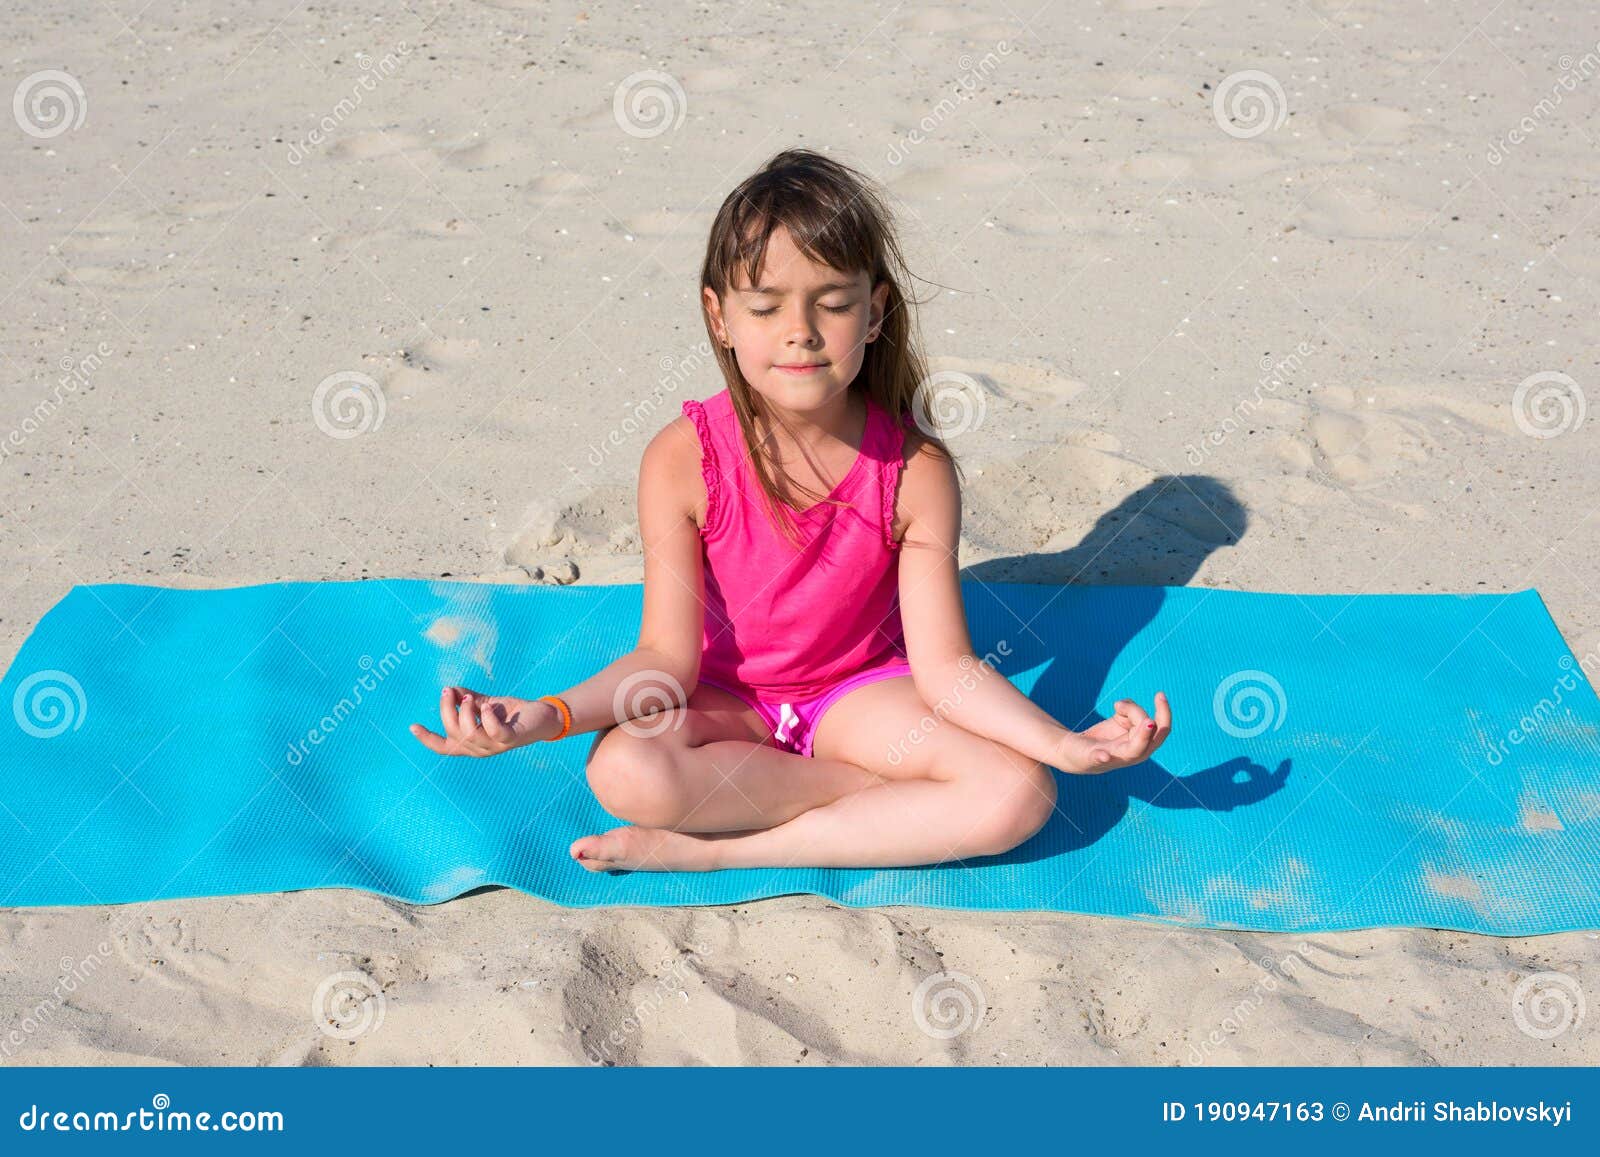 530 Little Girl Beach Yoga Photos Free Royalty Free Stock Photos From Dreamstime